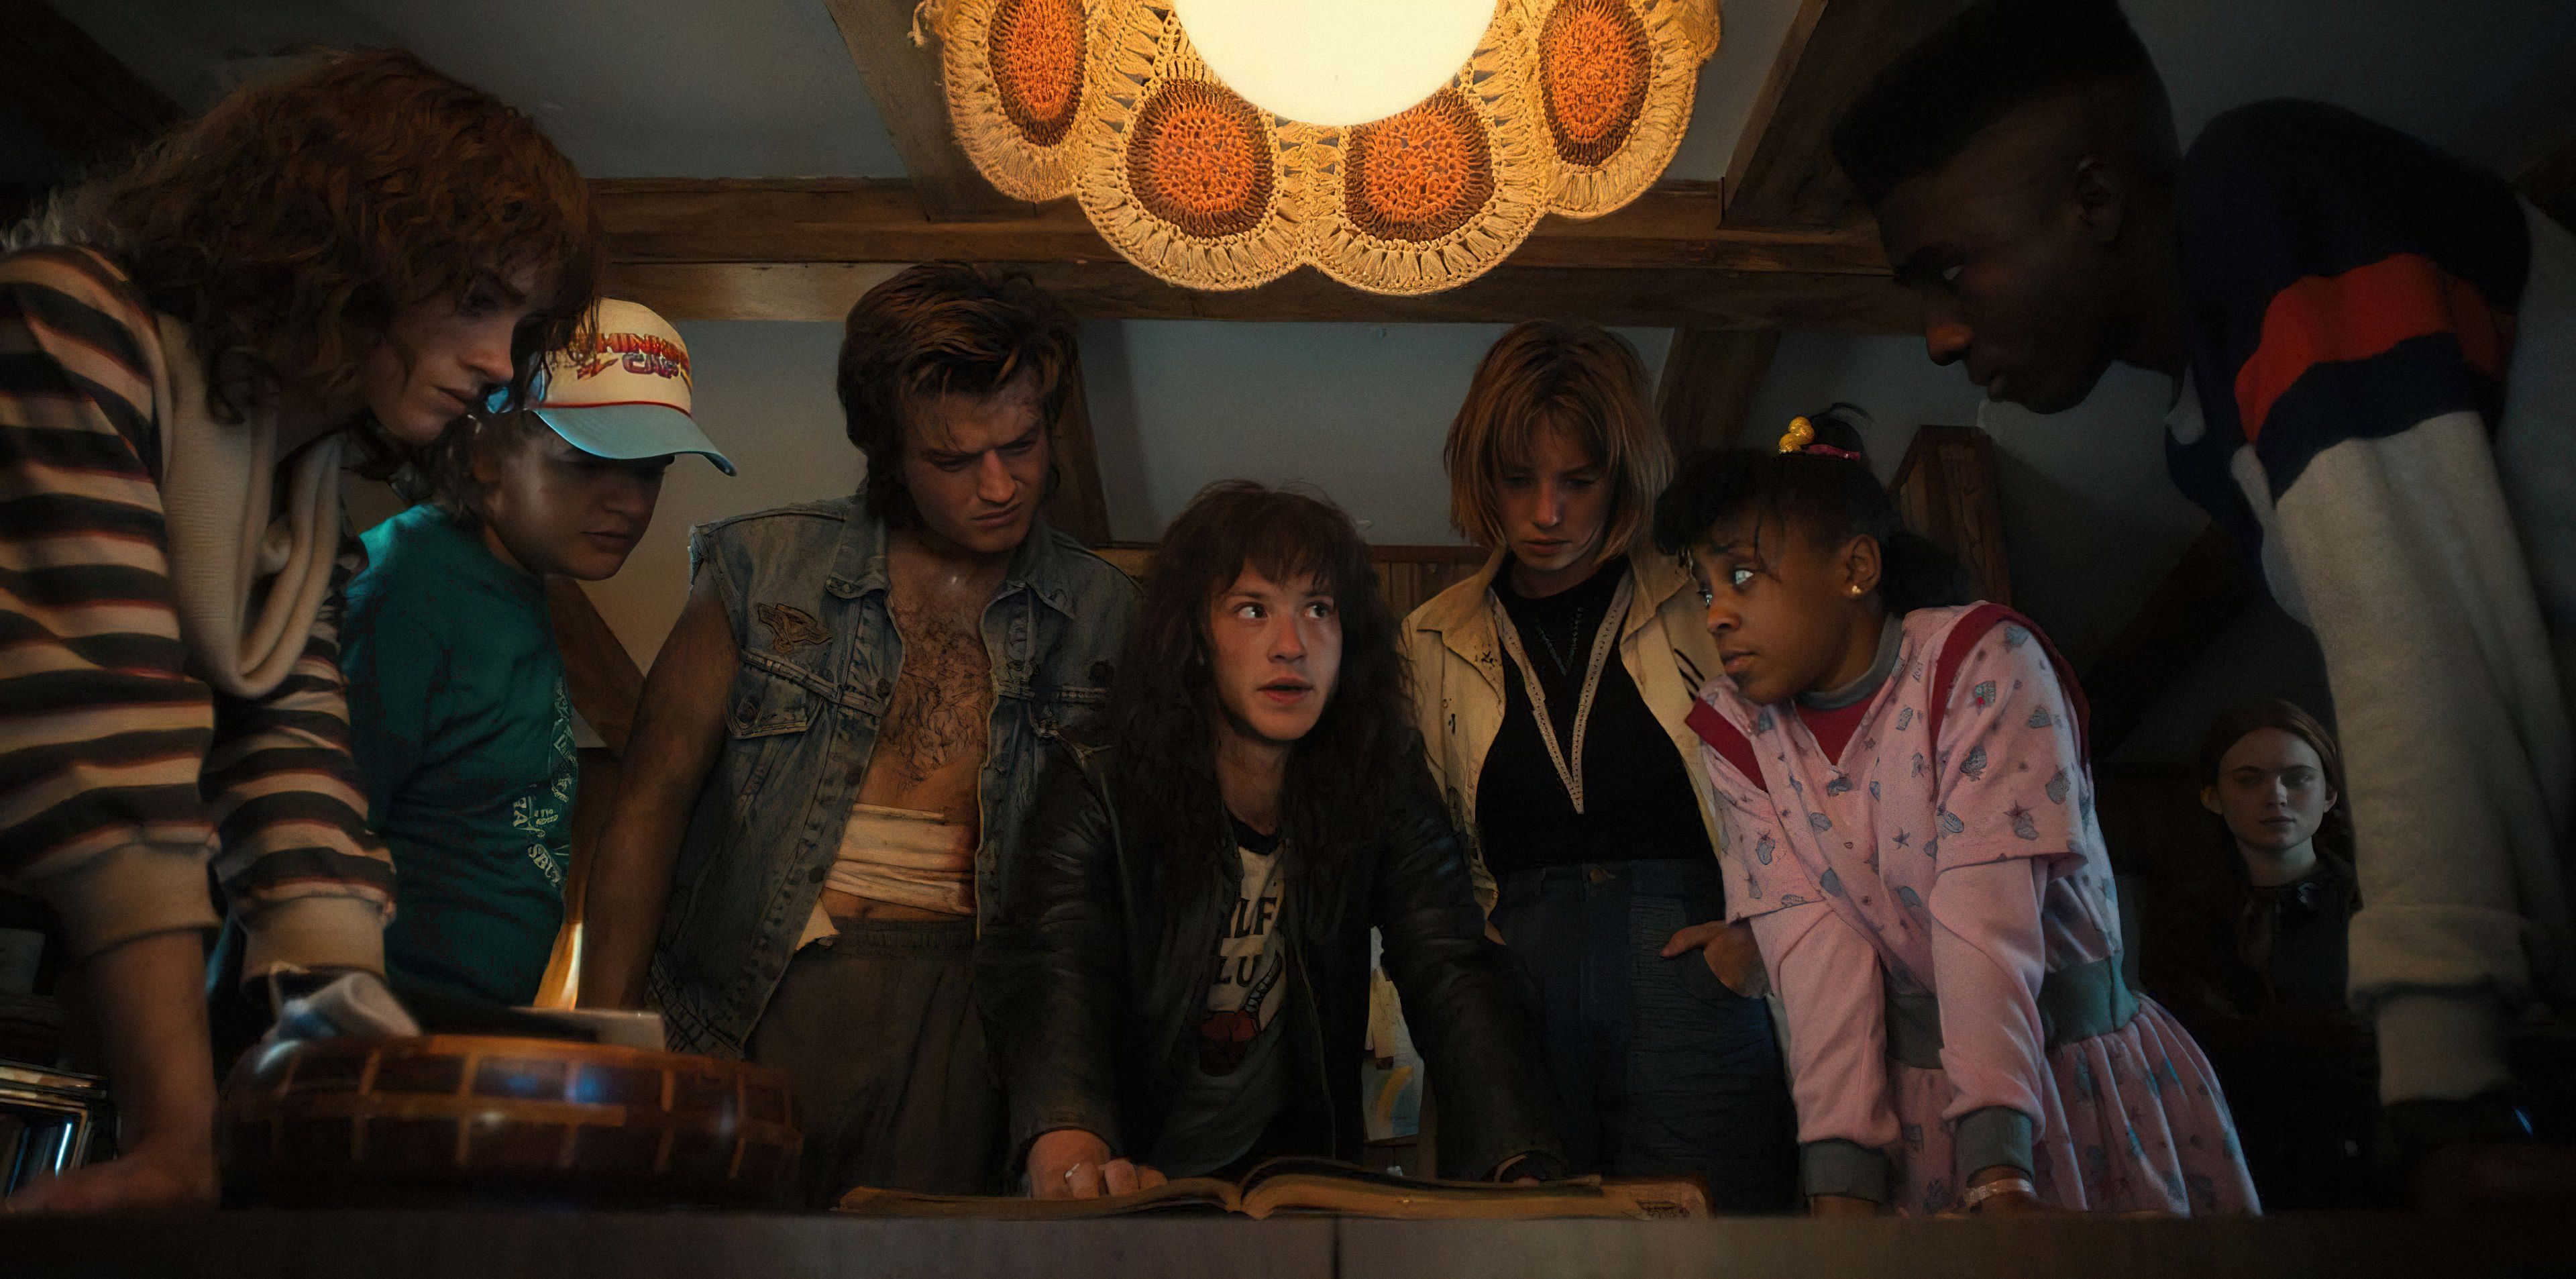 5 Characters That Could Die in Stranger Things 4